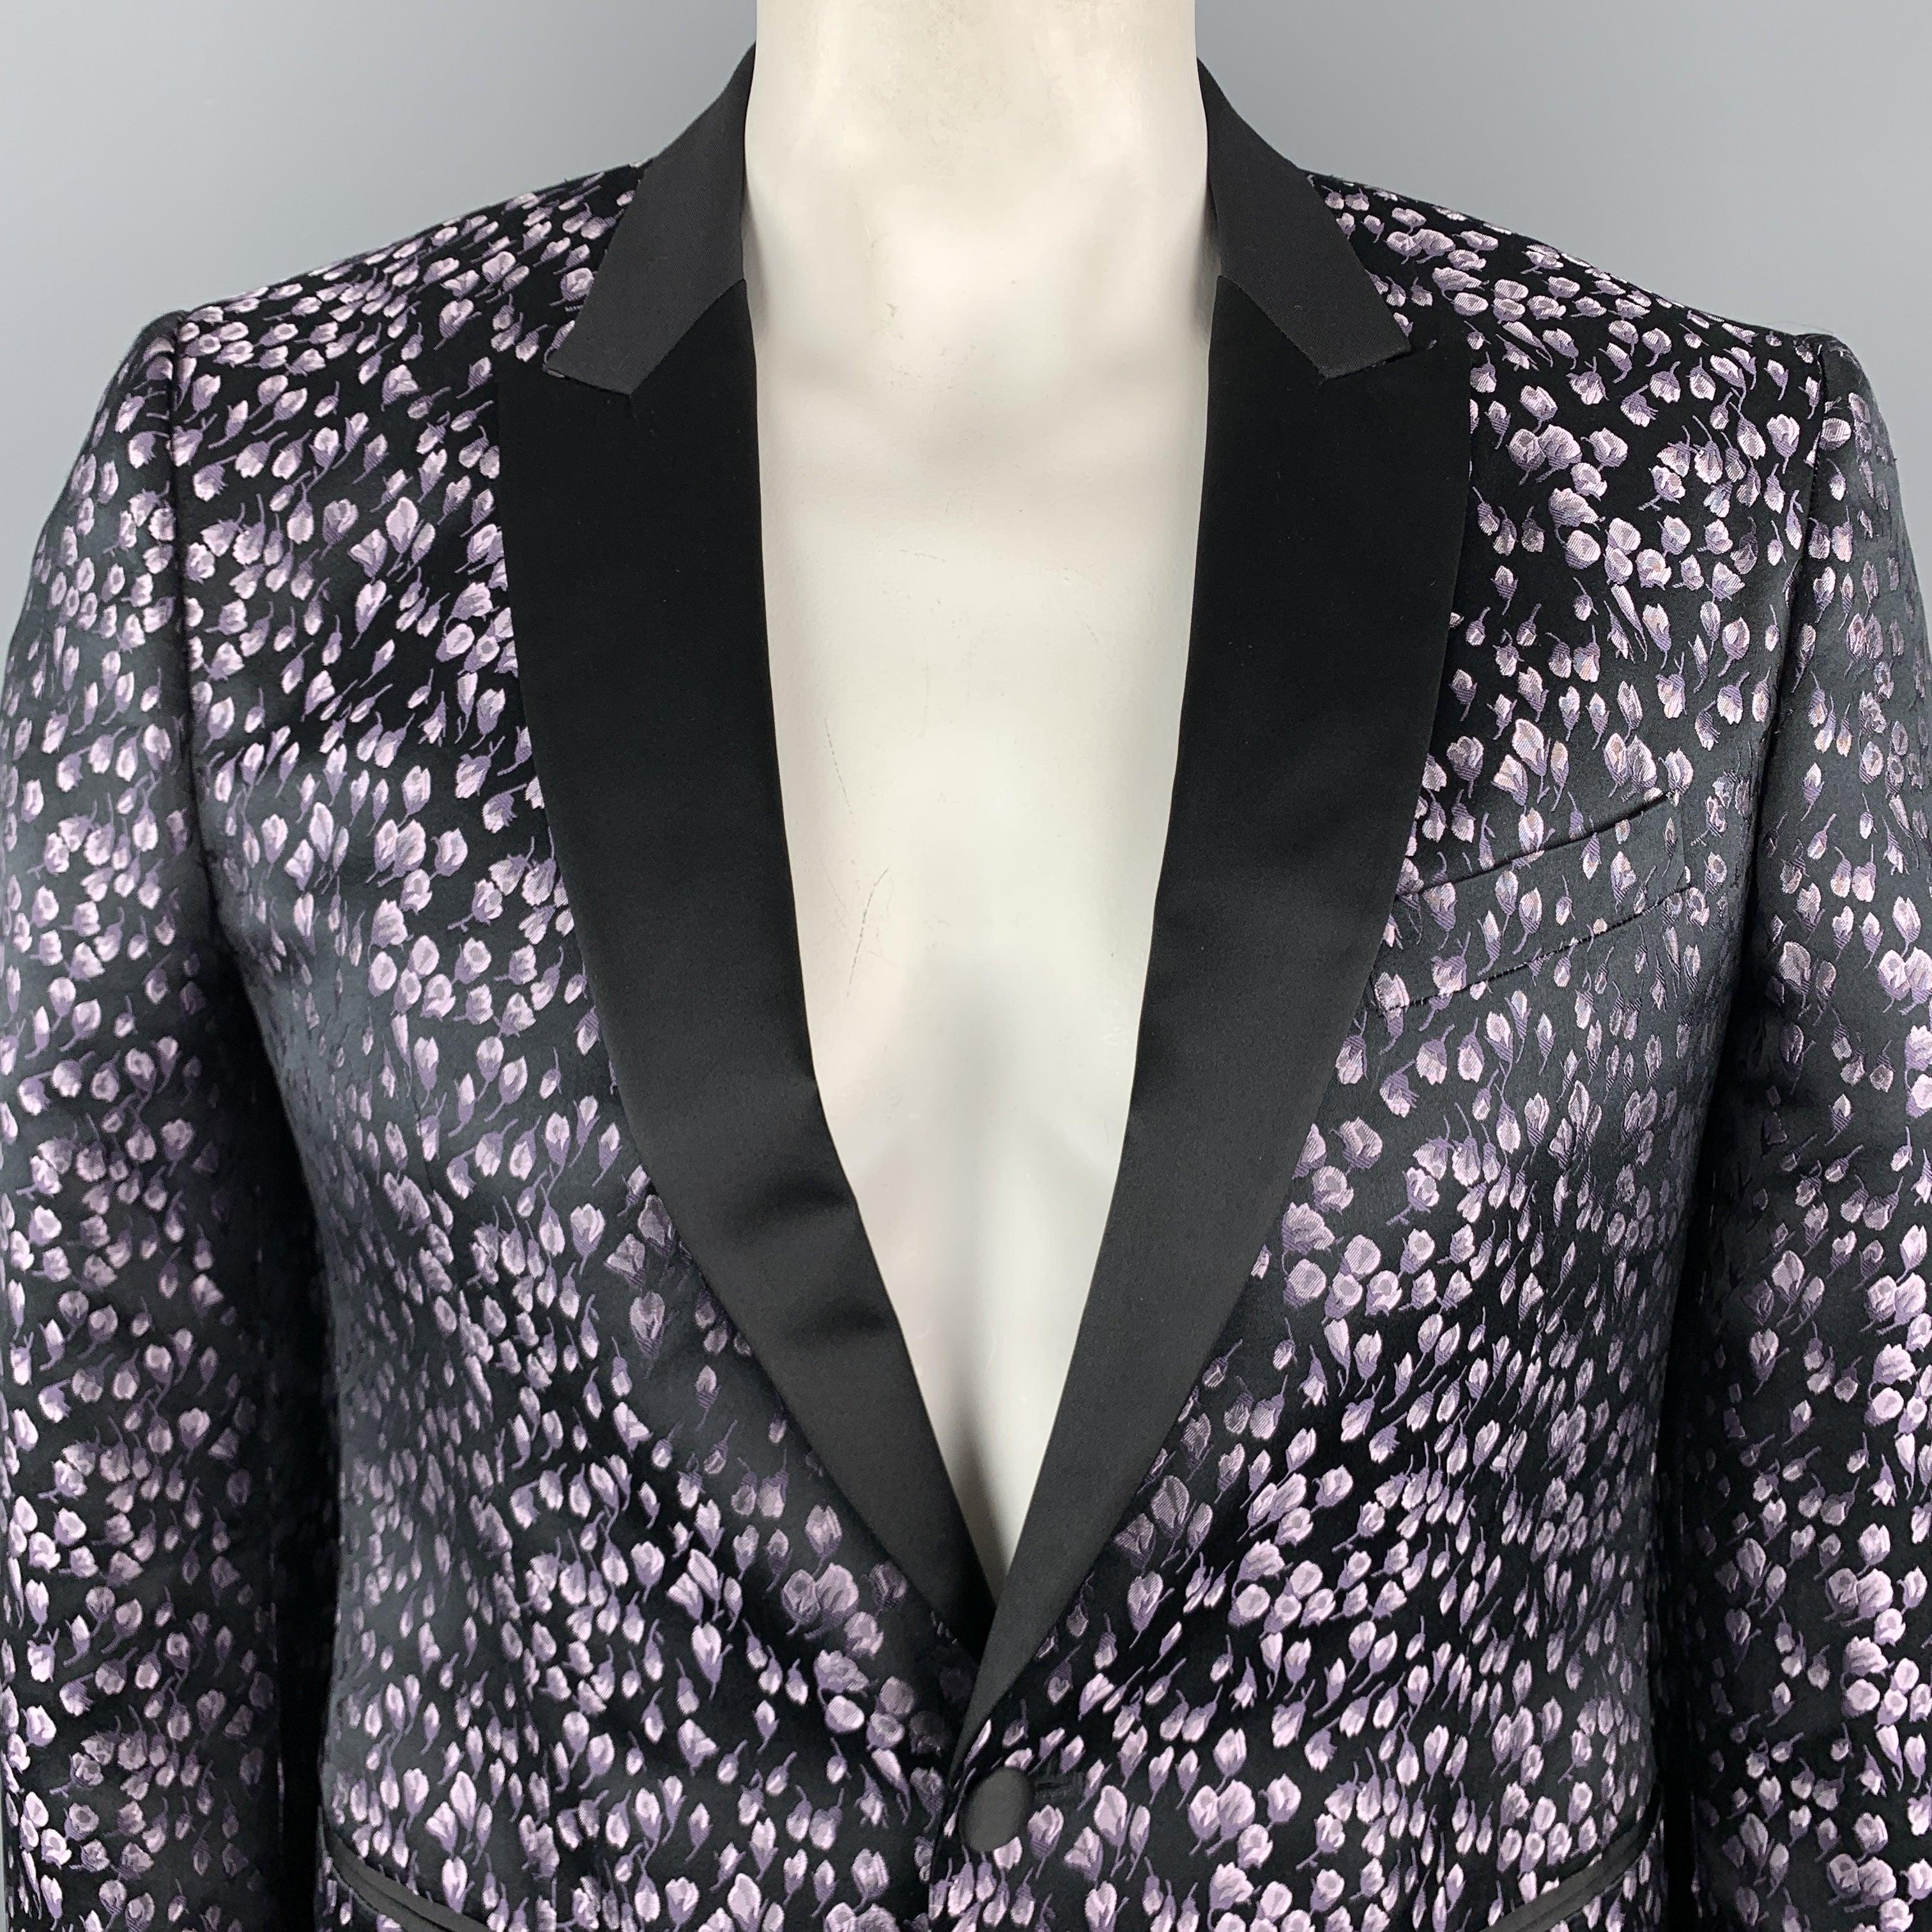 JOHN VARVATOS dinner jacket comes in black and lavender floral print silk satin jacquard with a black satin peak lapel, single breasted, one
 button front, and double vented back. Wear at back. Made in Italy.
Very Good Pre-Owned Condition.
